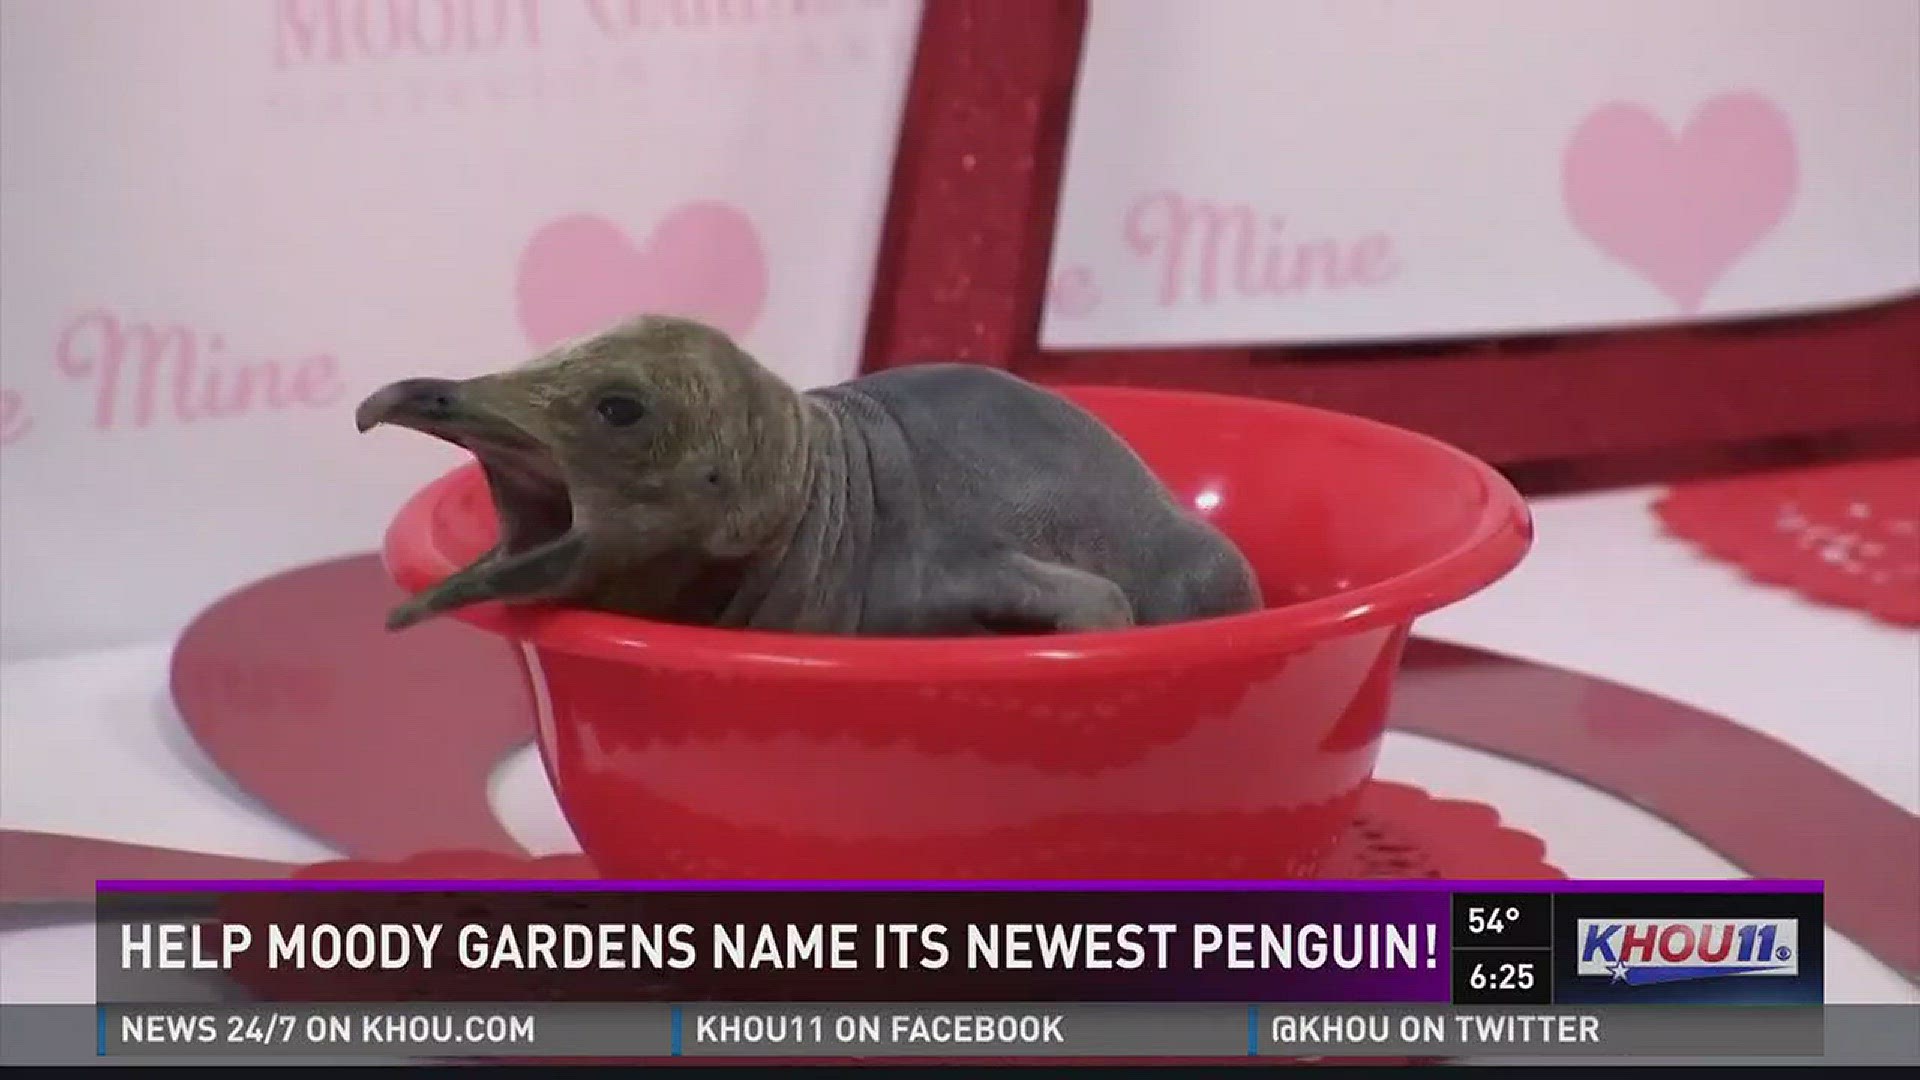 The King penguin chick born earlier this month to a first-time mother still doesn't have a name, and Moody Gardens is asking for the public's assistance in choosing one.